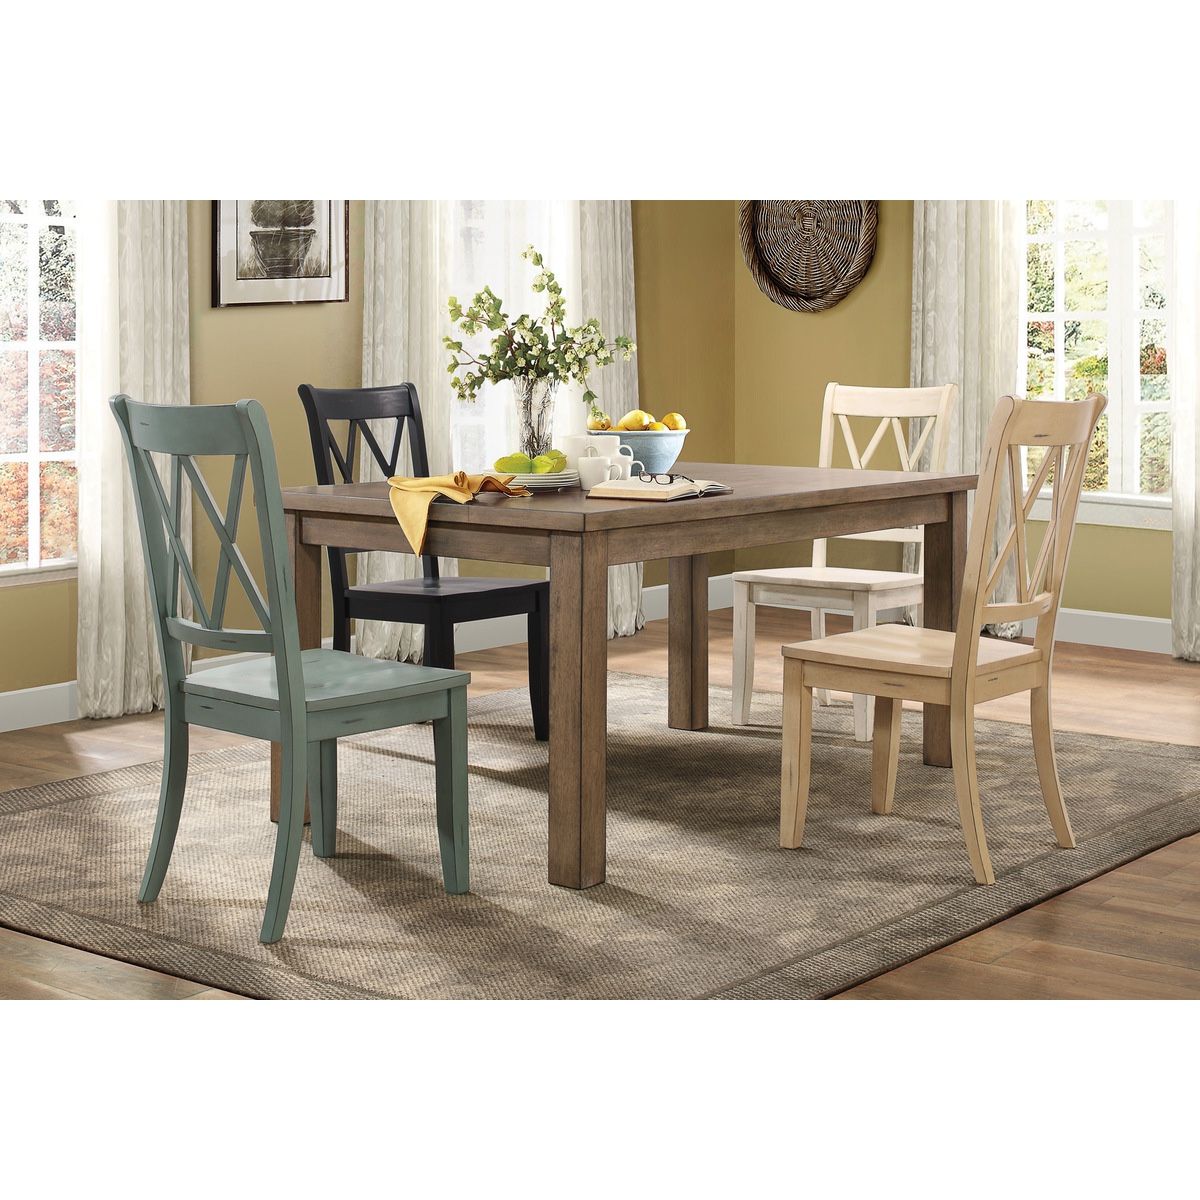 Kitchen dinning table set w 4 chairs